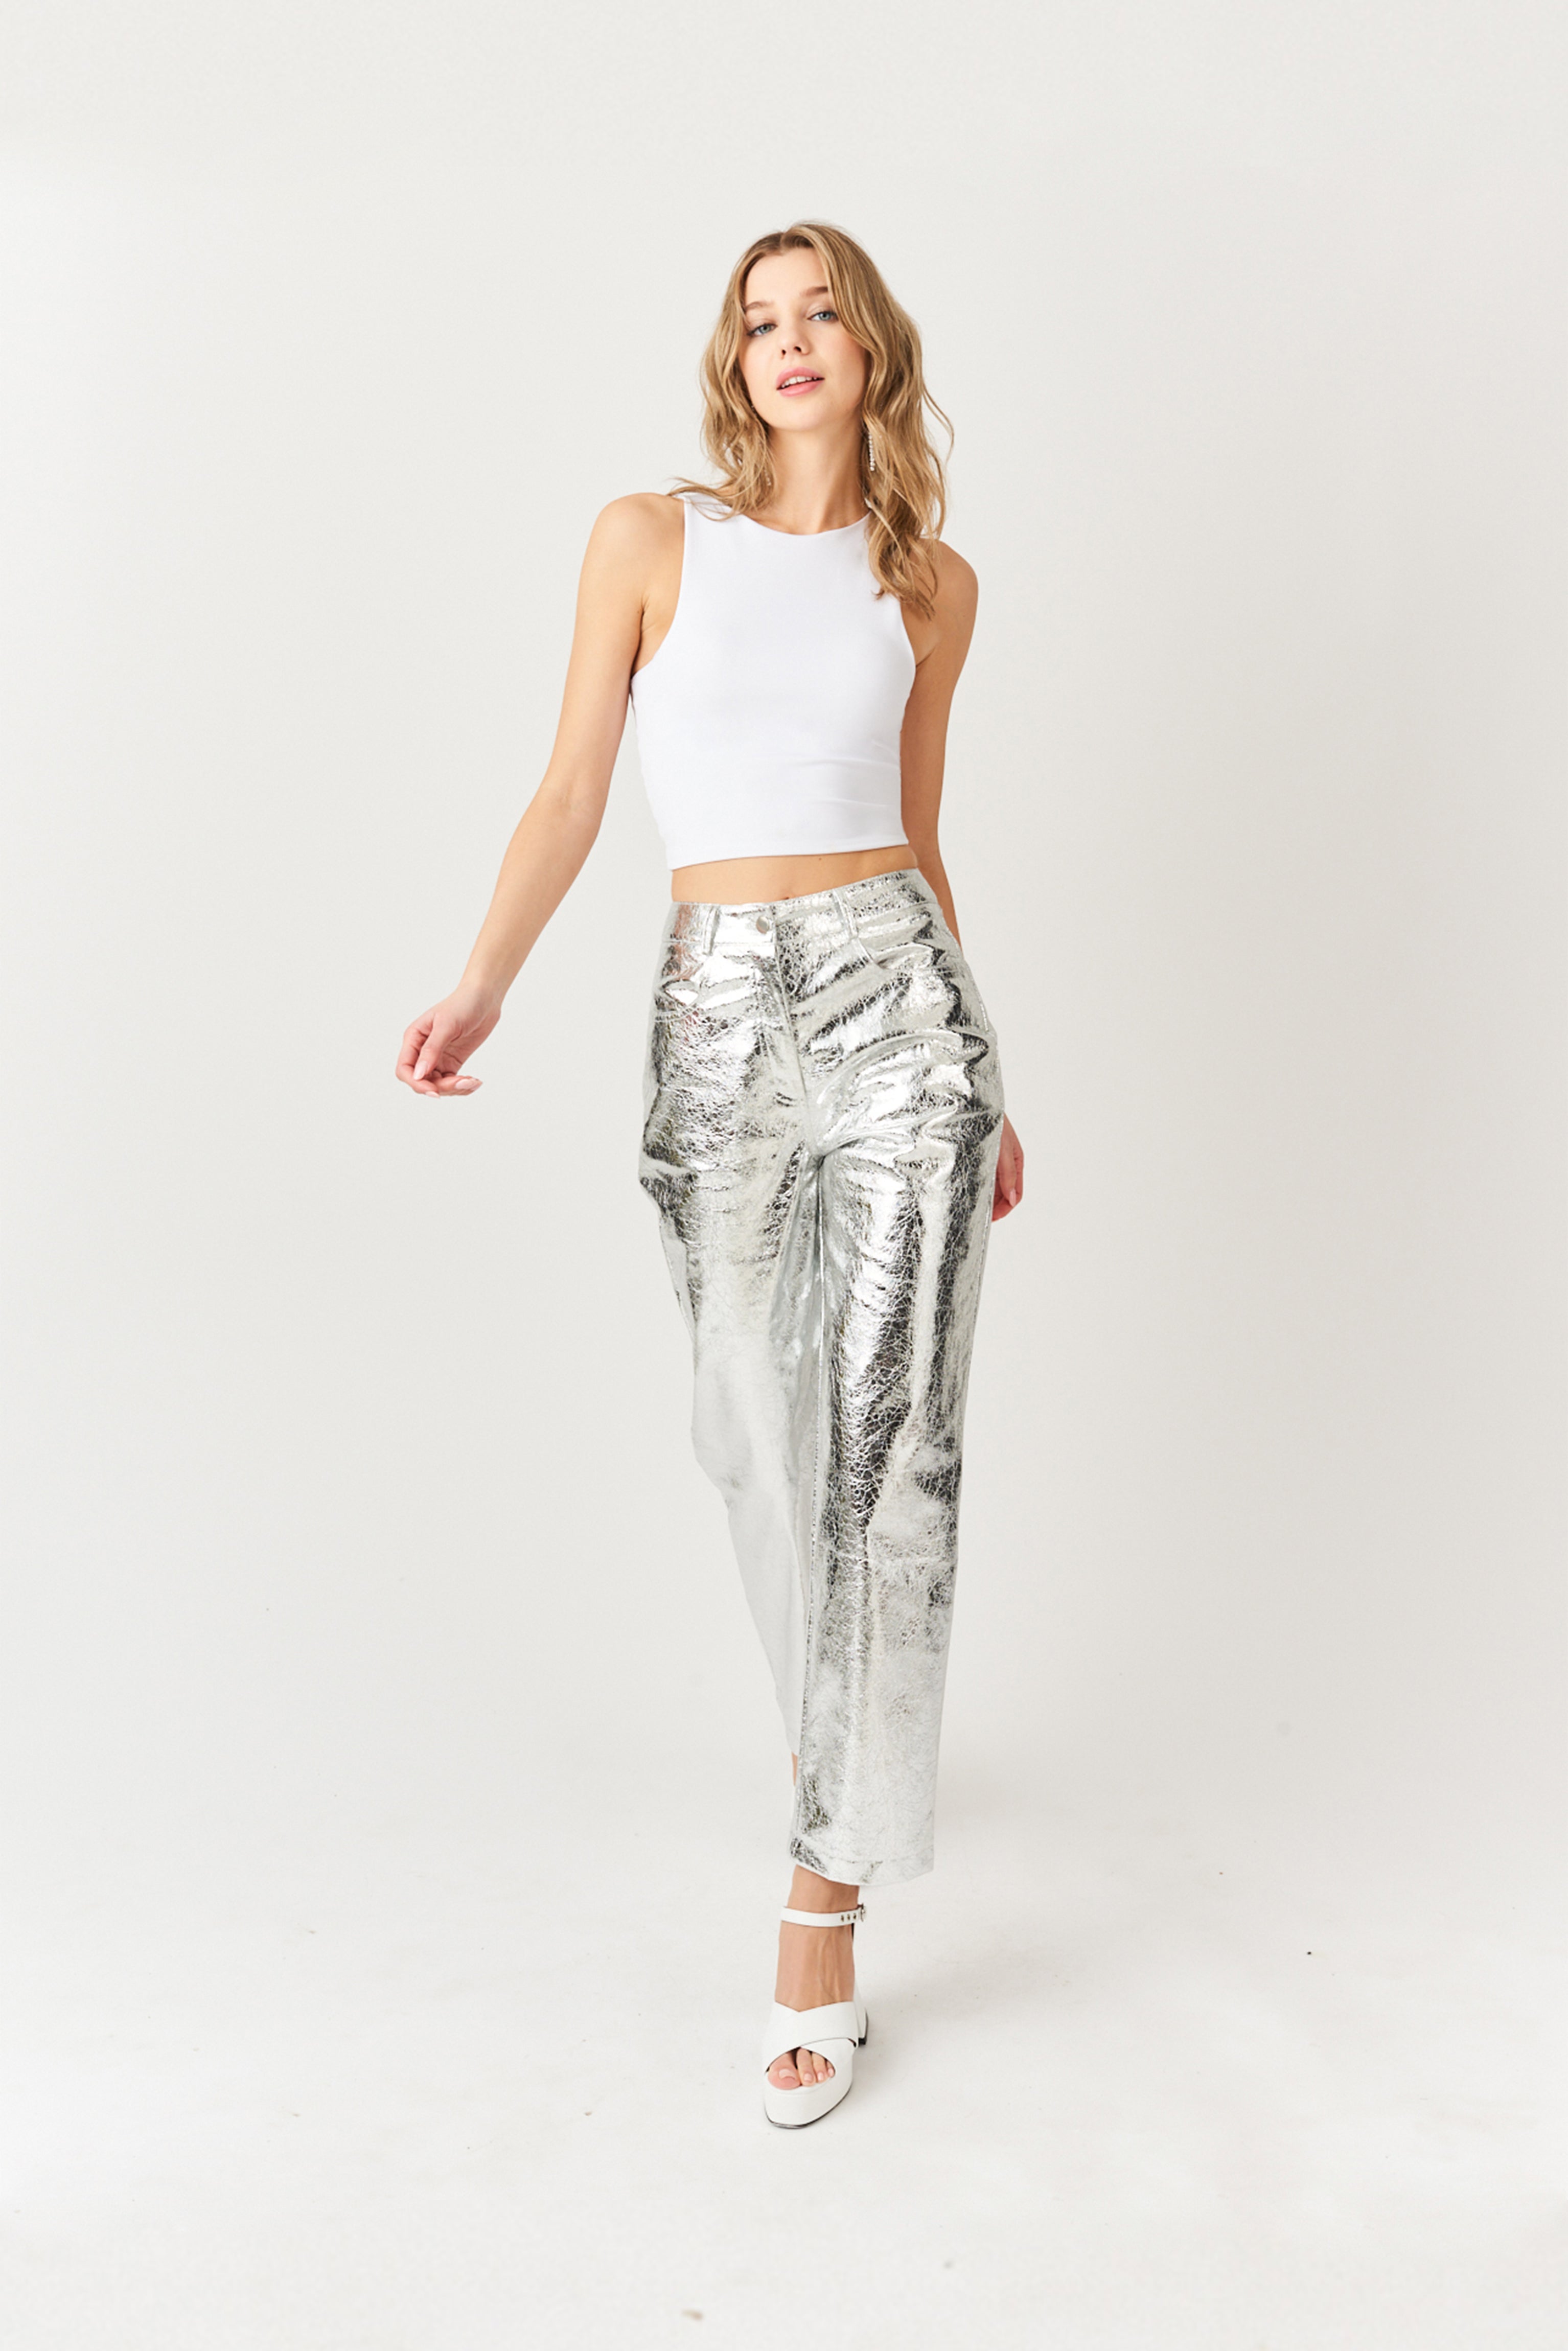 Lupe Shiny Silver Textured Metallic PU High Waisted Straight Leg Trousers